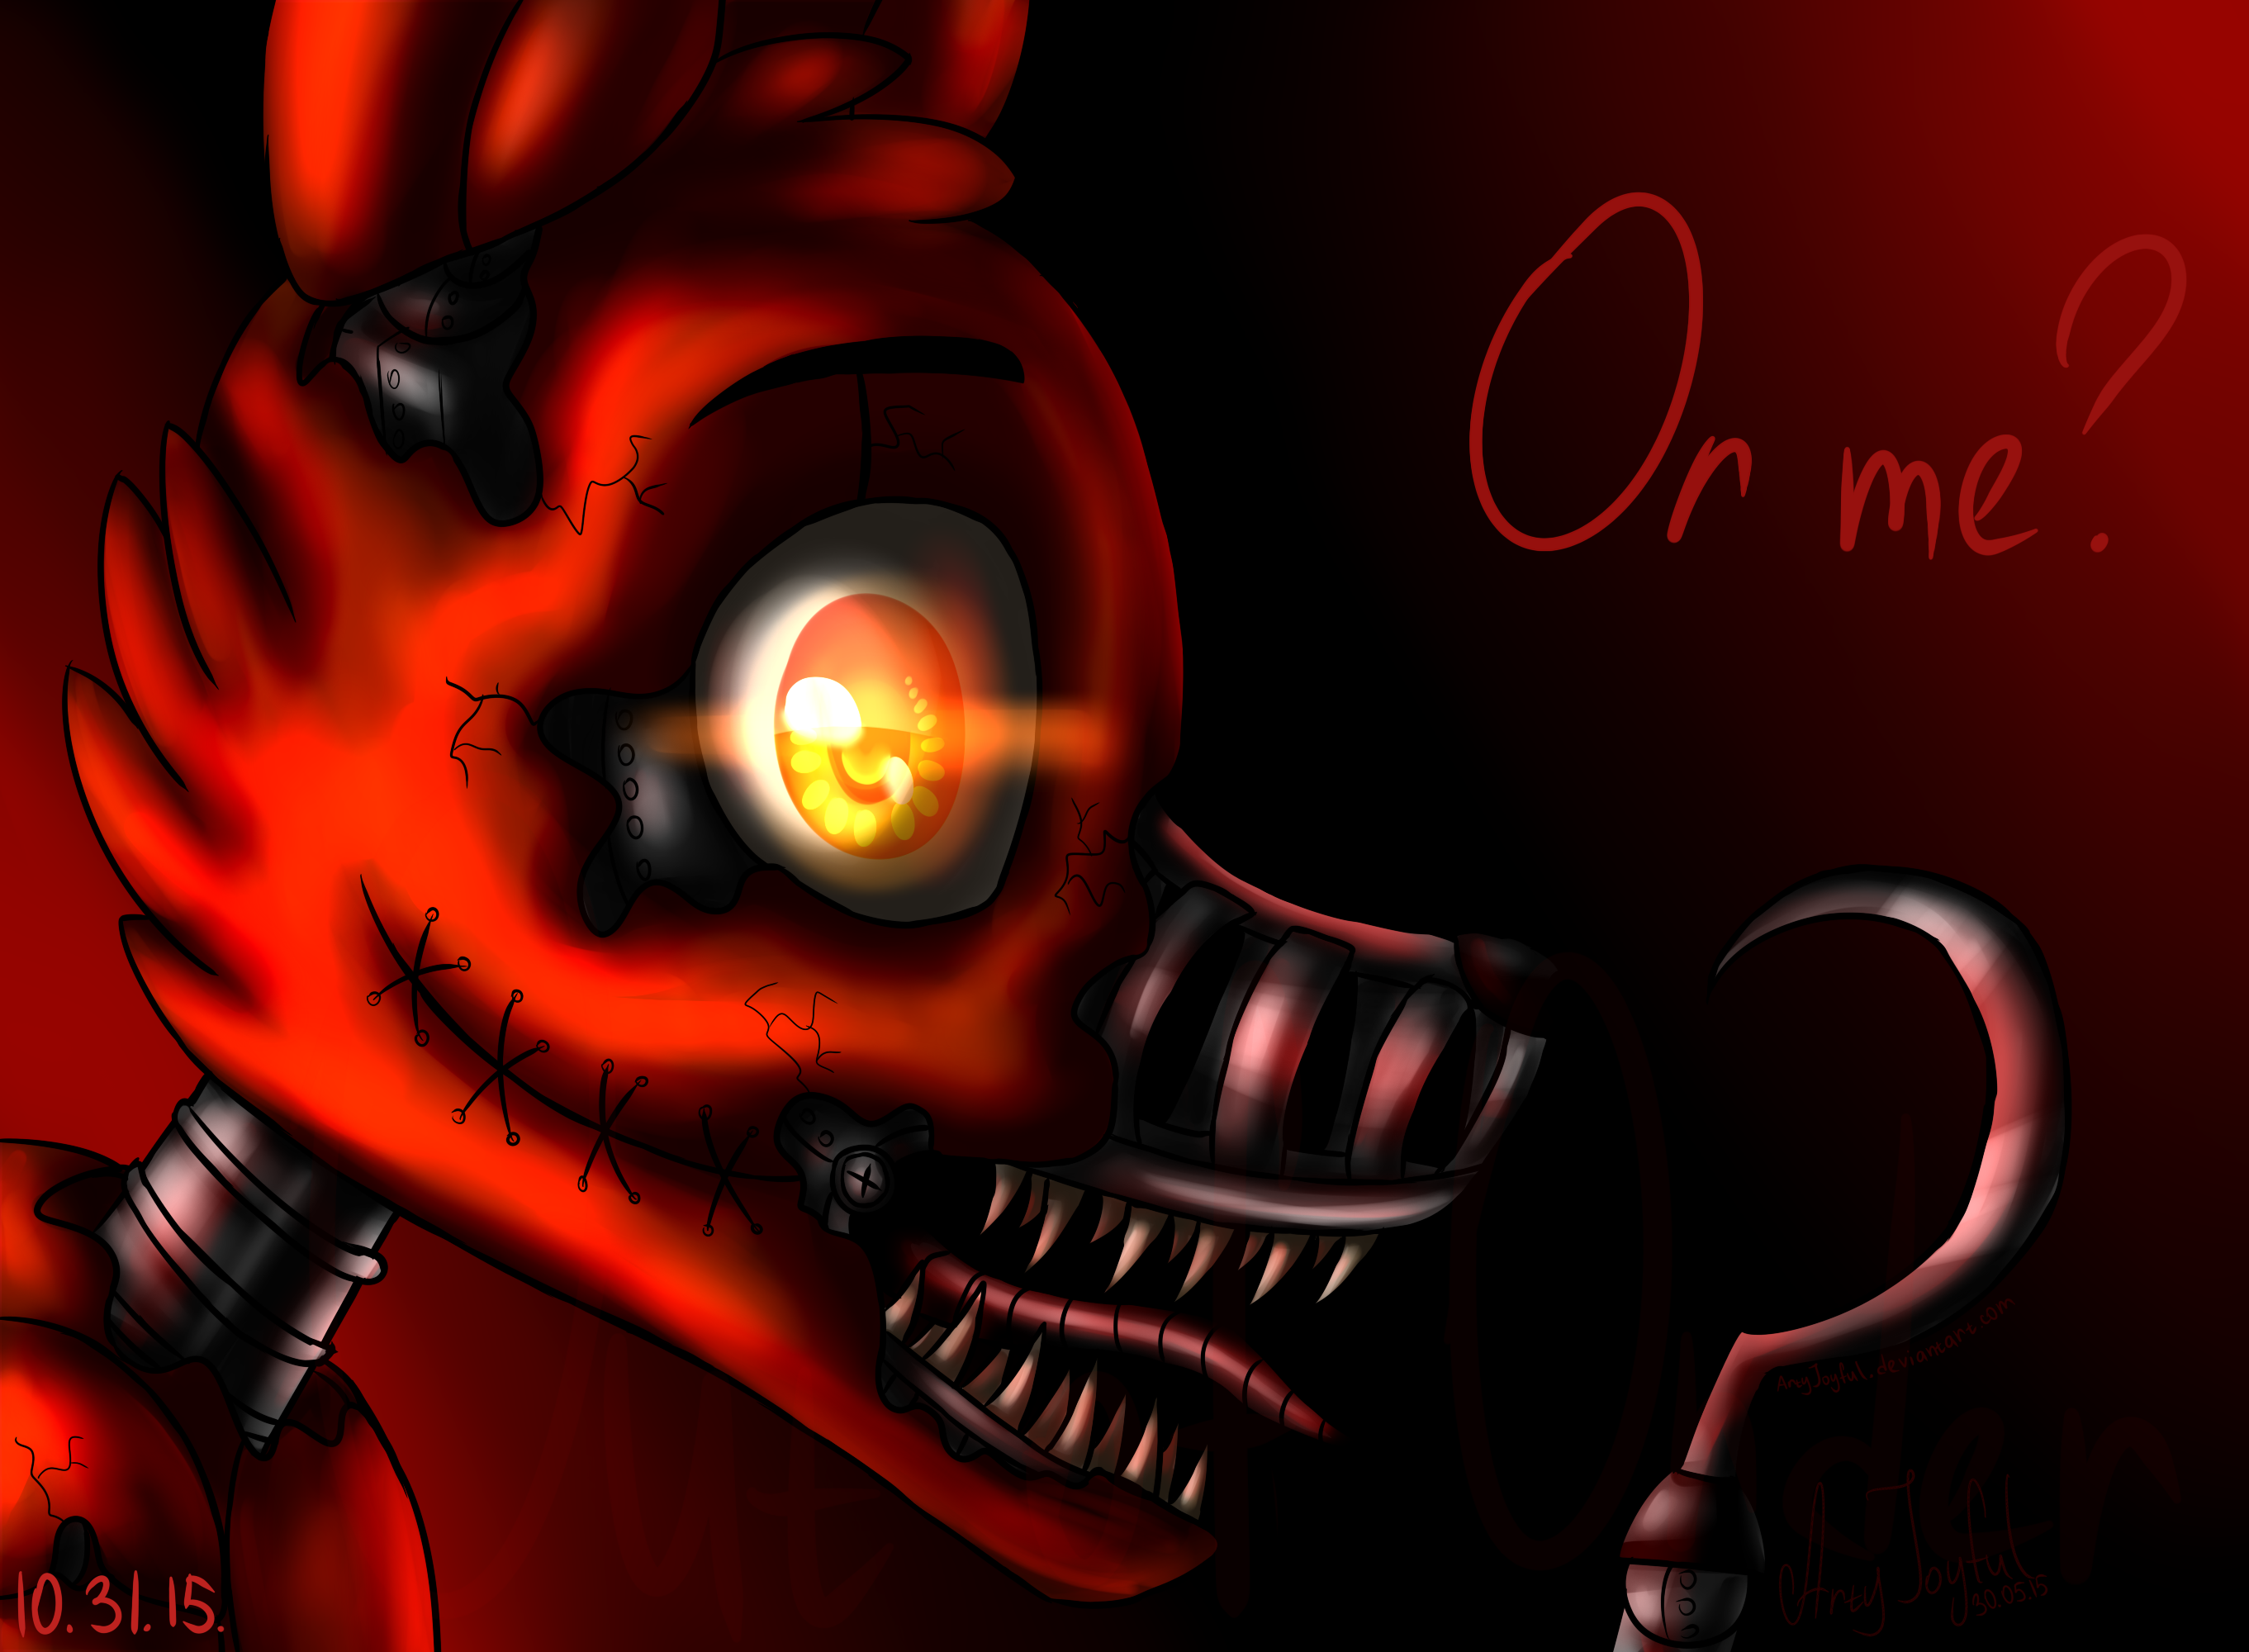 Five Nights at Freddys images Fan art of nightmare foxy HD